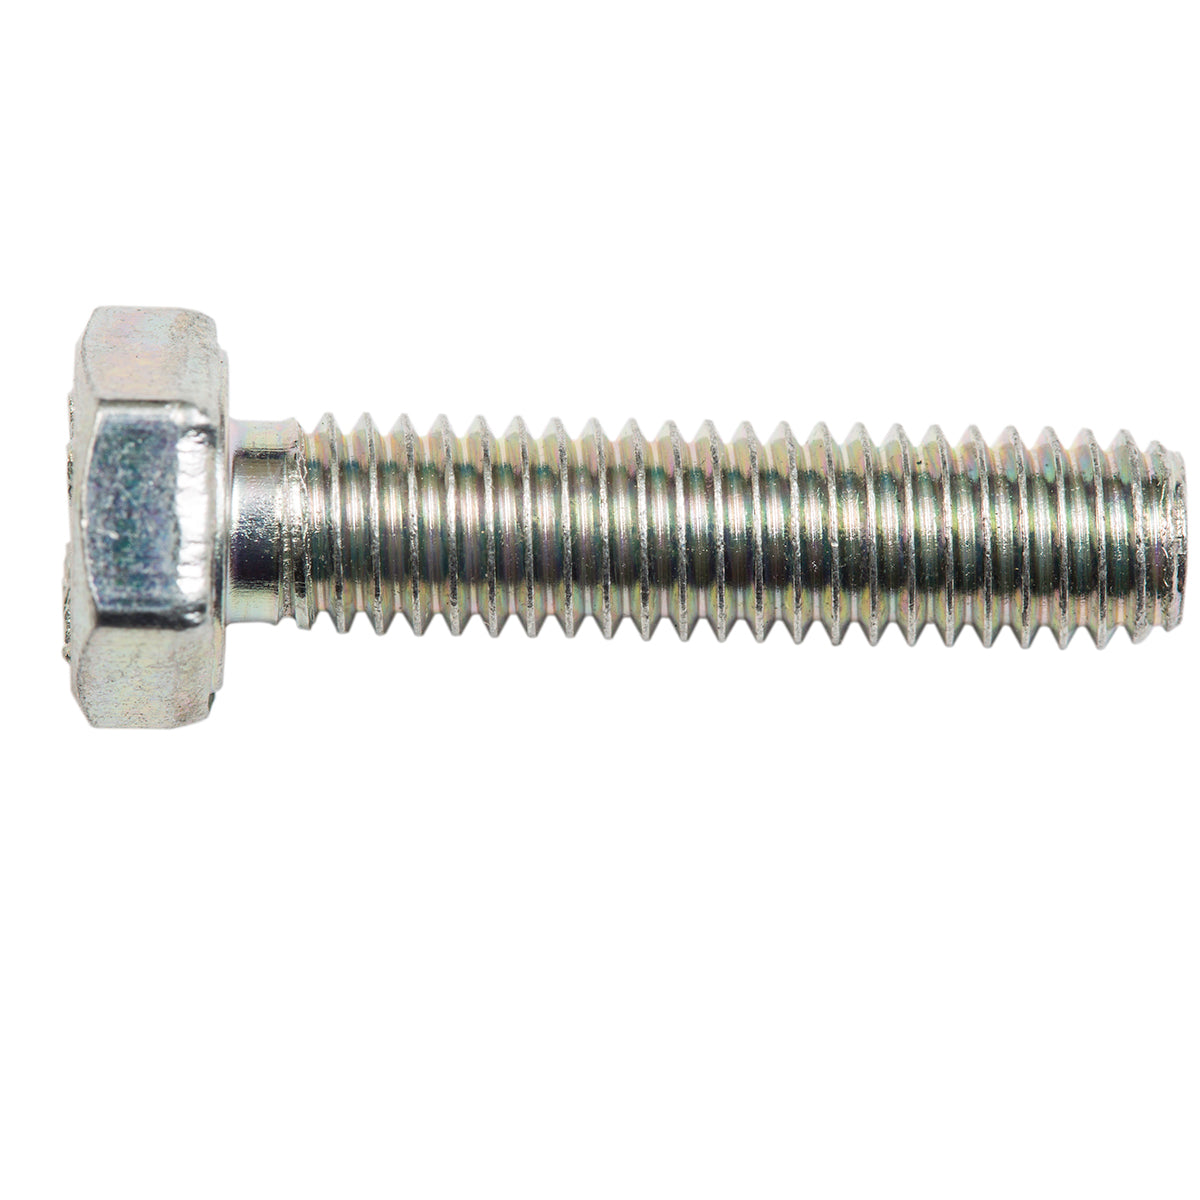 John Deere Cap Screw For Use On Many Models of Riding Lawn Equipment and Implements